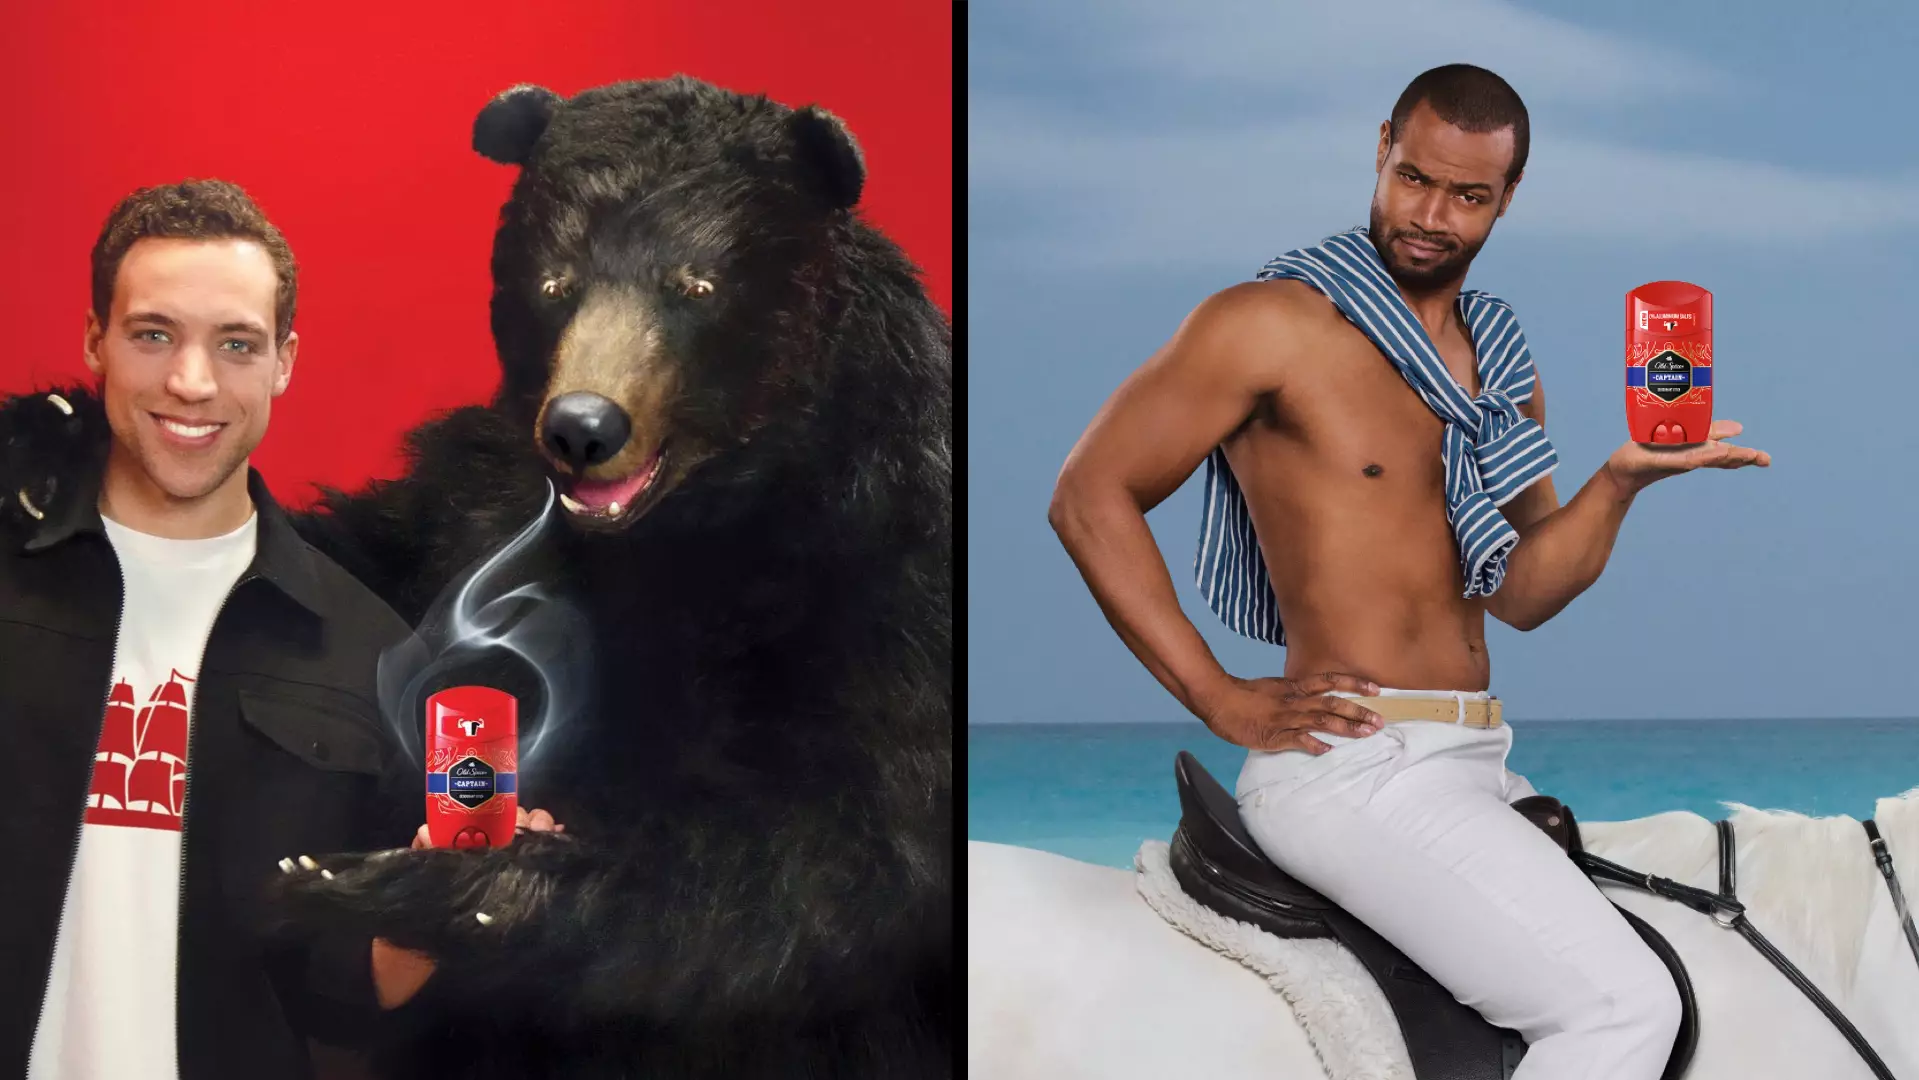 ​Could You Be The New Face Of Old Spice?